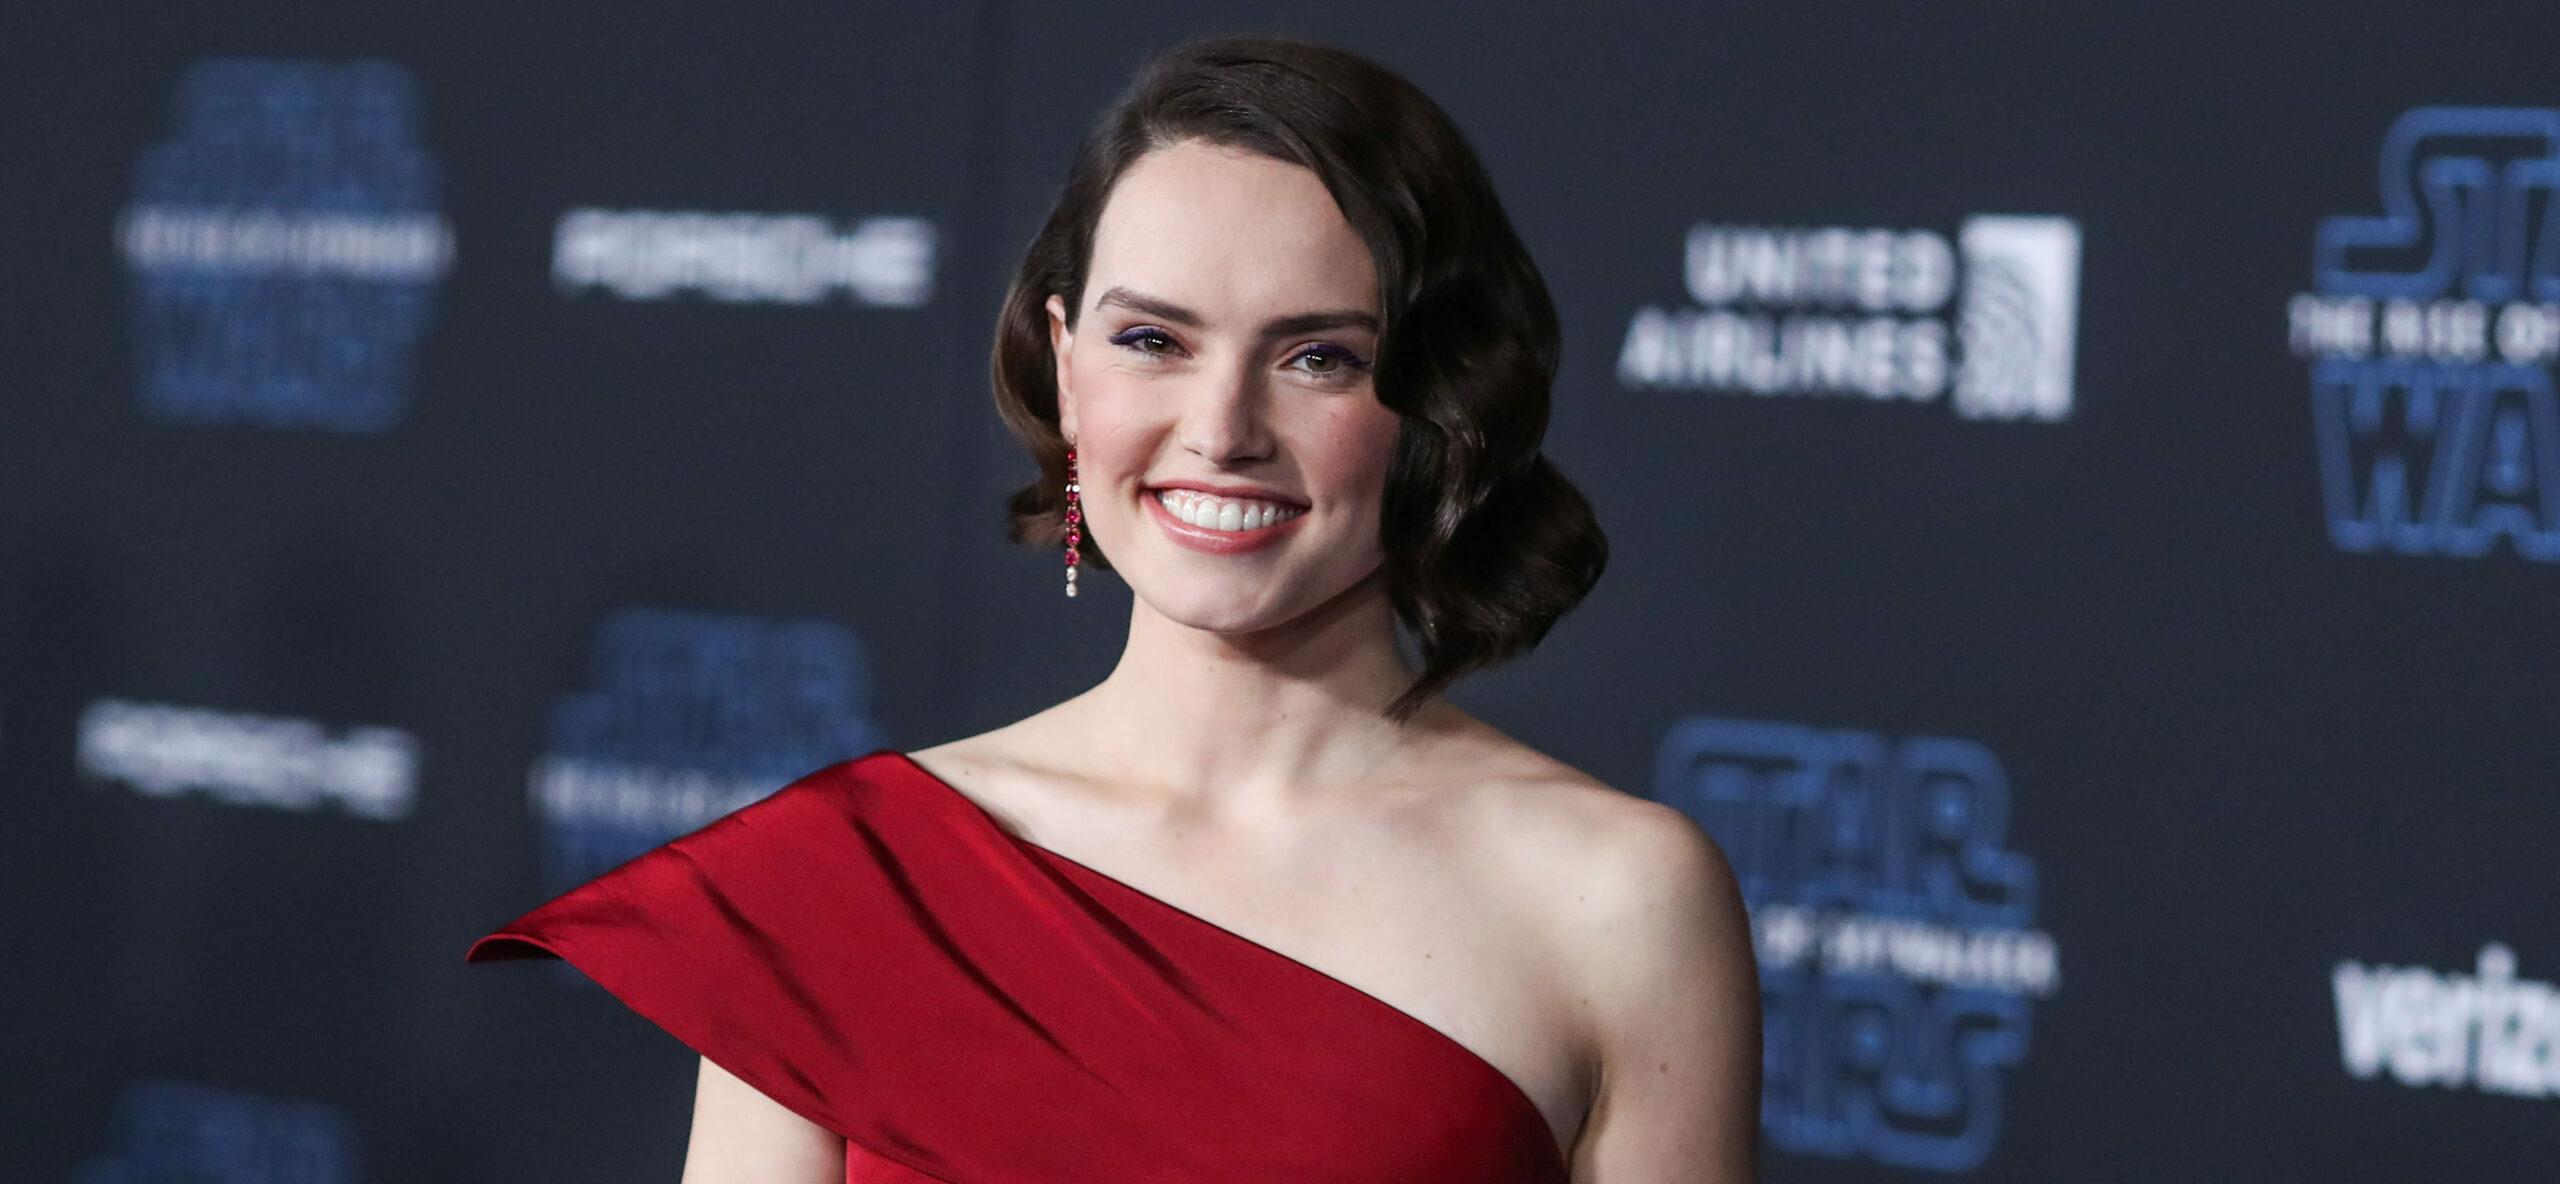 ‘Star Wars’ Alum Daisy Ridley Came Back To Instagram 1 Year Ago Today